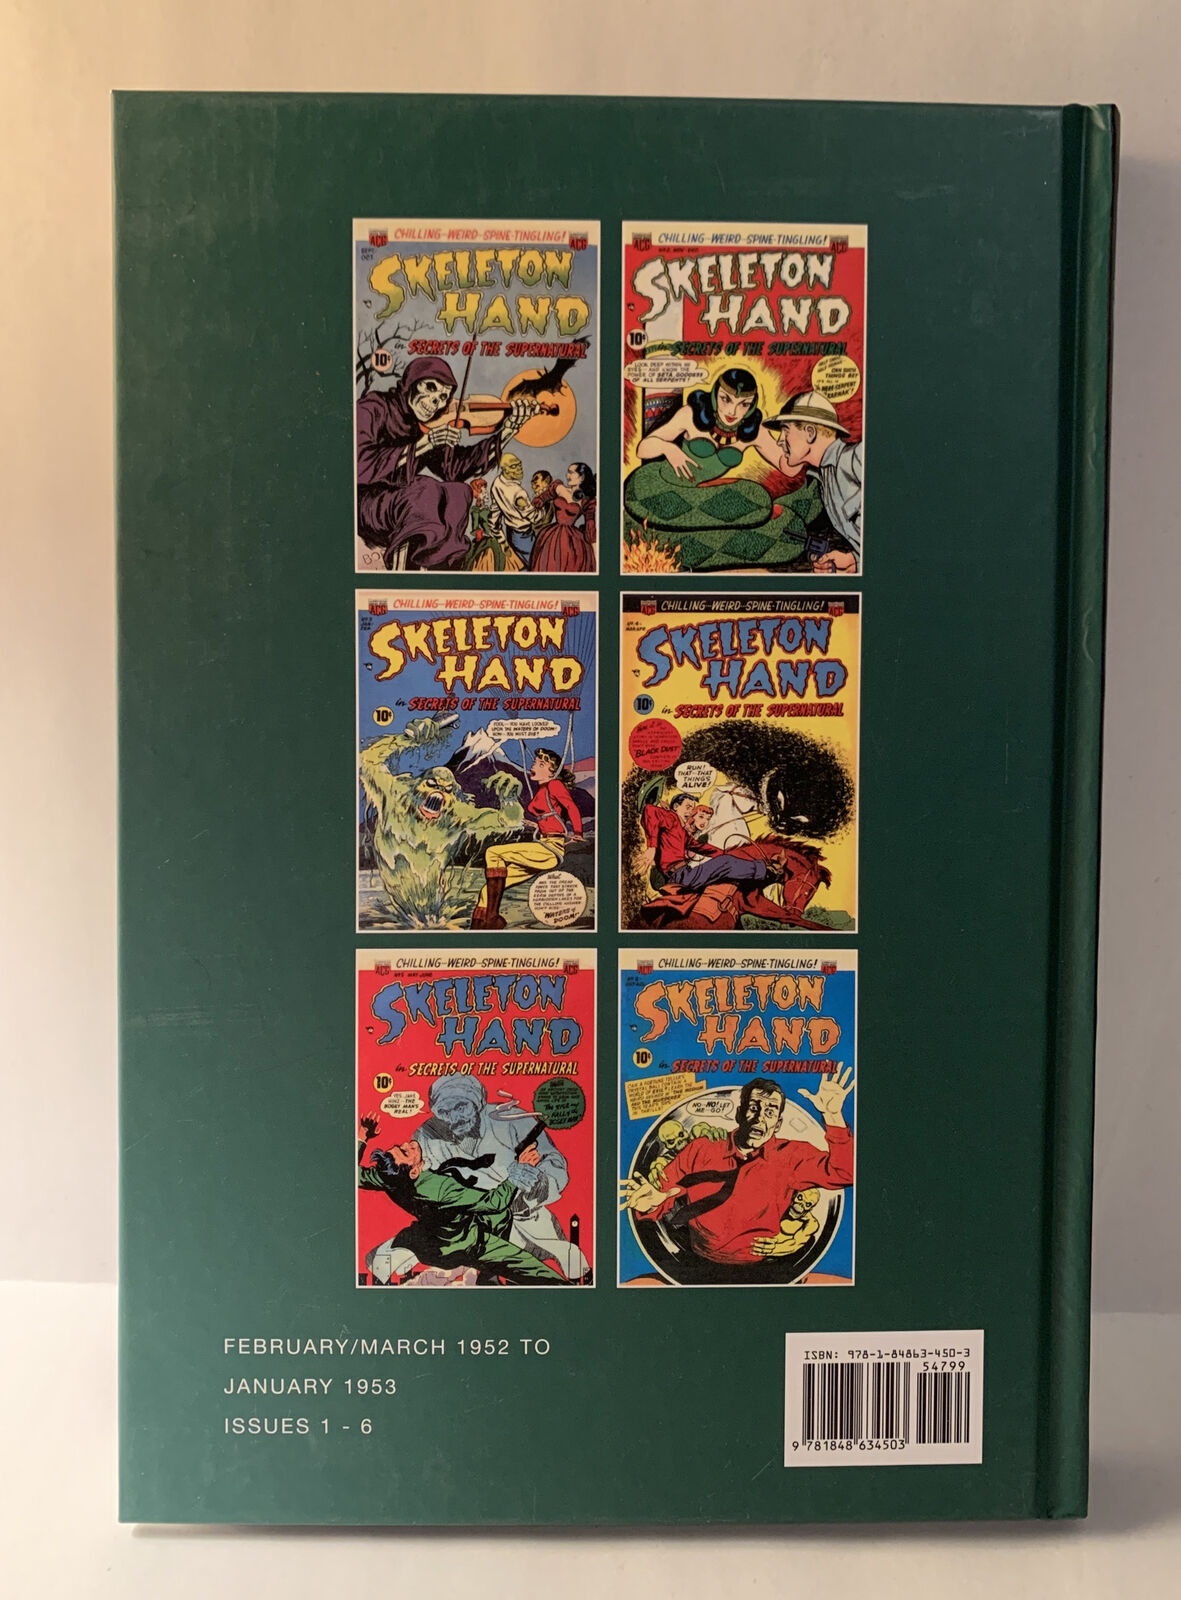 ACG Collected Works: Skeleton Hand Issues 1-6 Hardcover